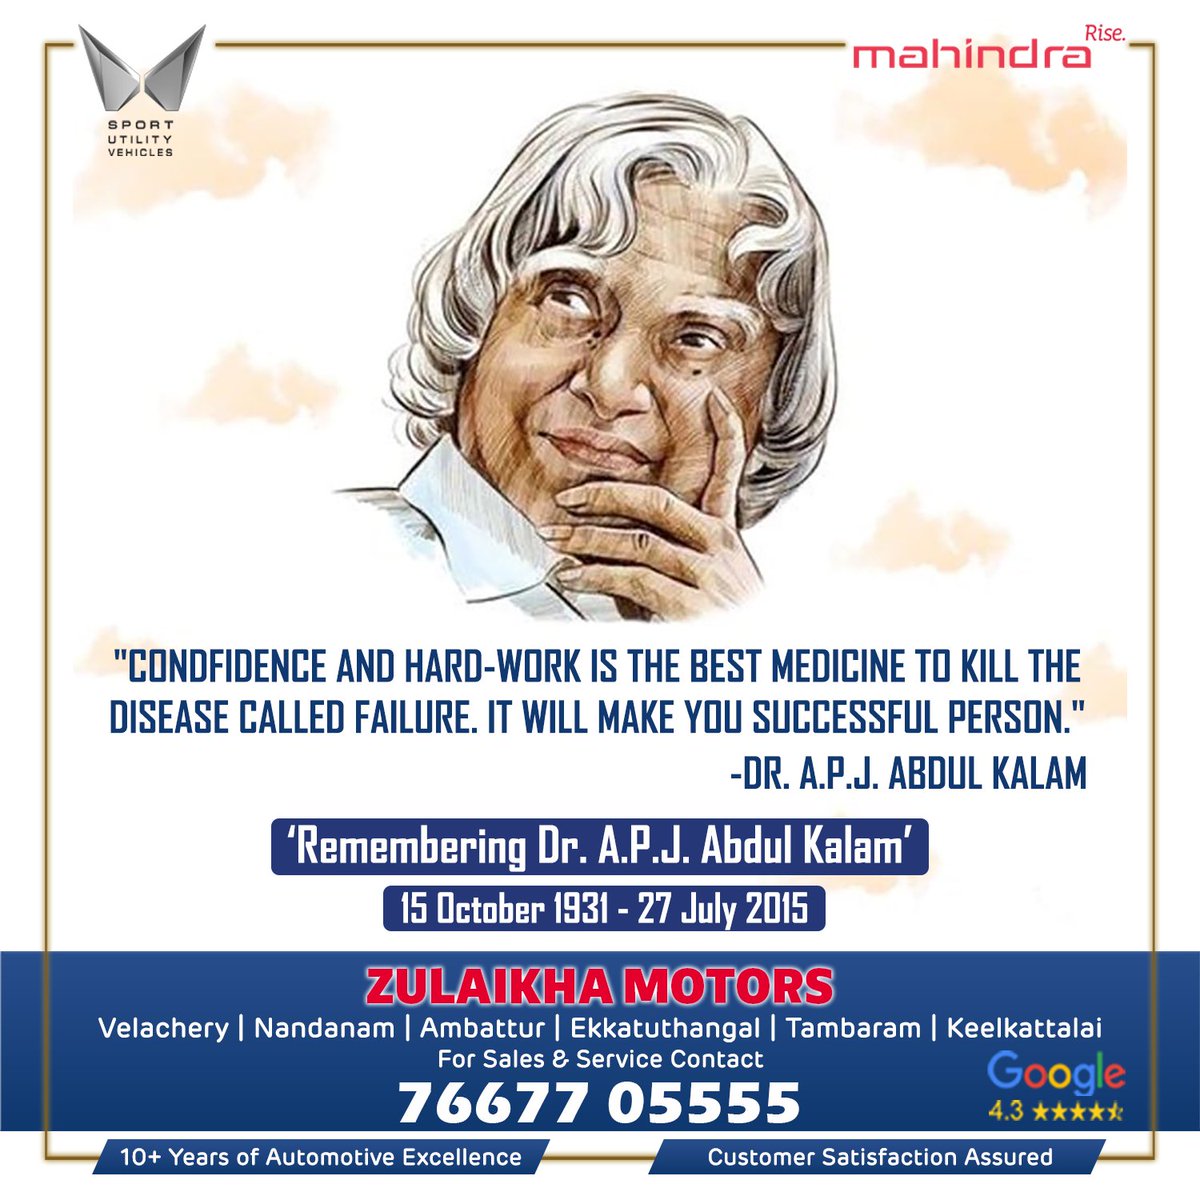 'Remembering the visionary Dr. APJ Abdul Kalam on his death anniversary, as he continues to inspire us to dream, innovate, and reach for the stars.'

#zulaikhaMotors  #APJAbdulKalam #MissleMan #JULY26TH